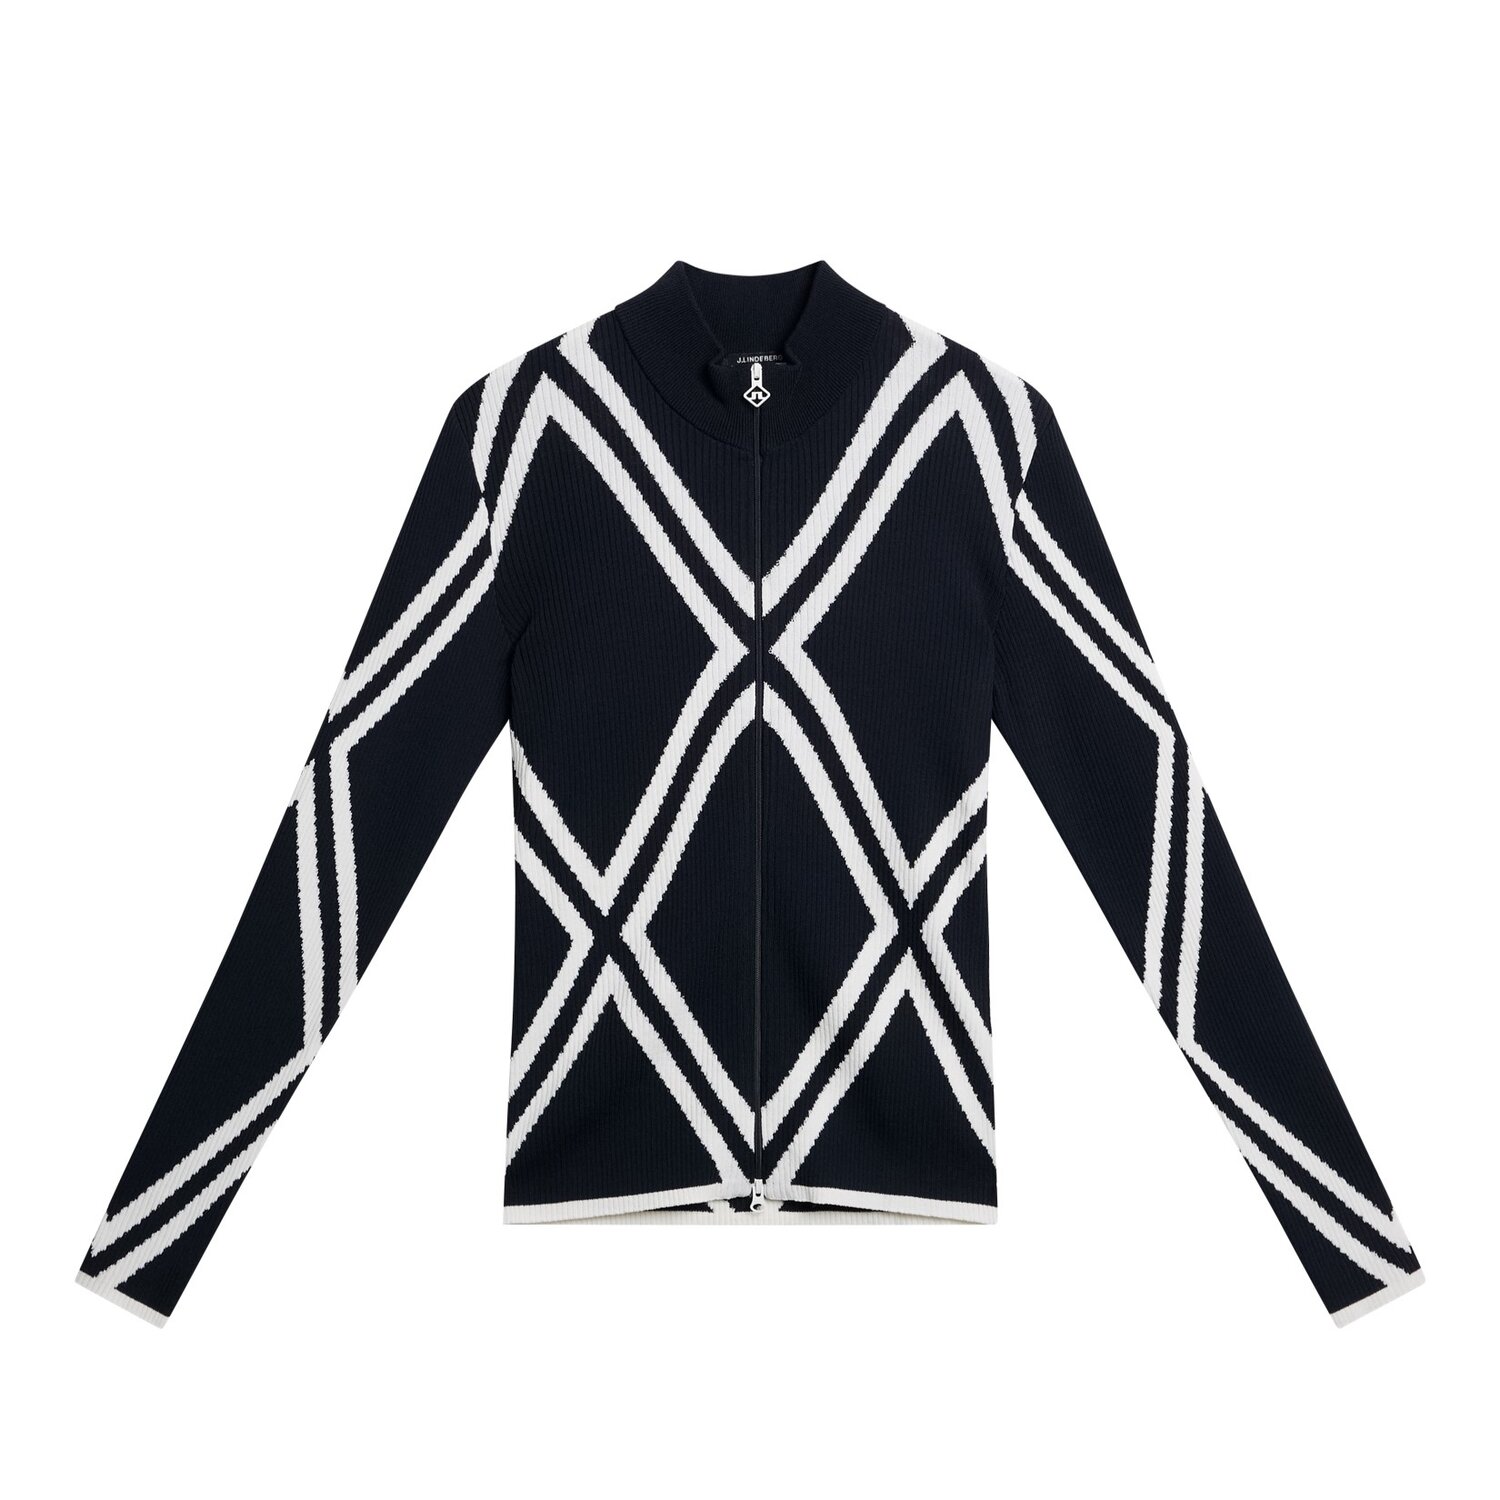 J.Lindeberg Flora Knitted Sweater